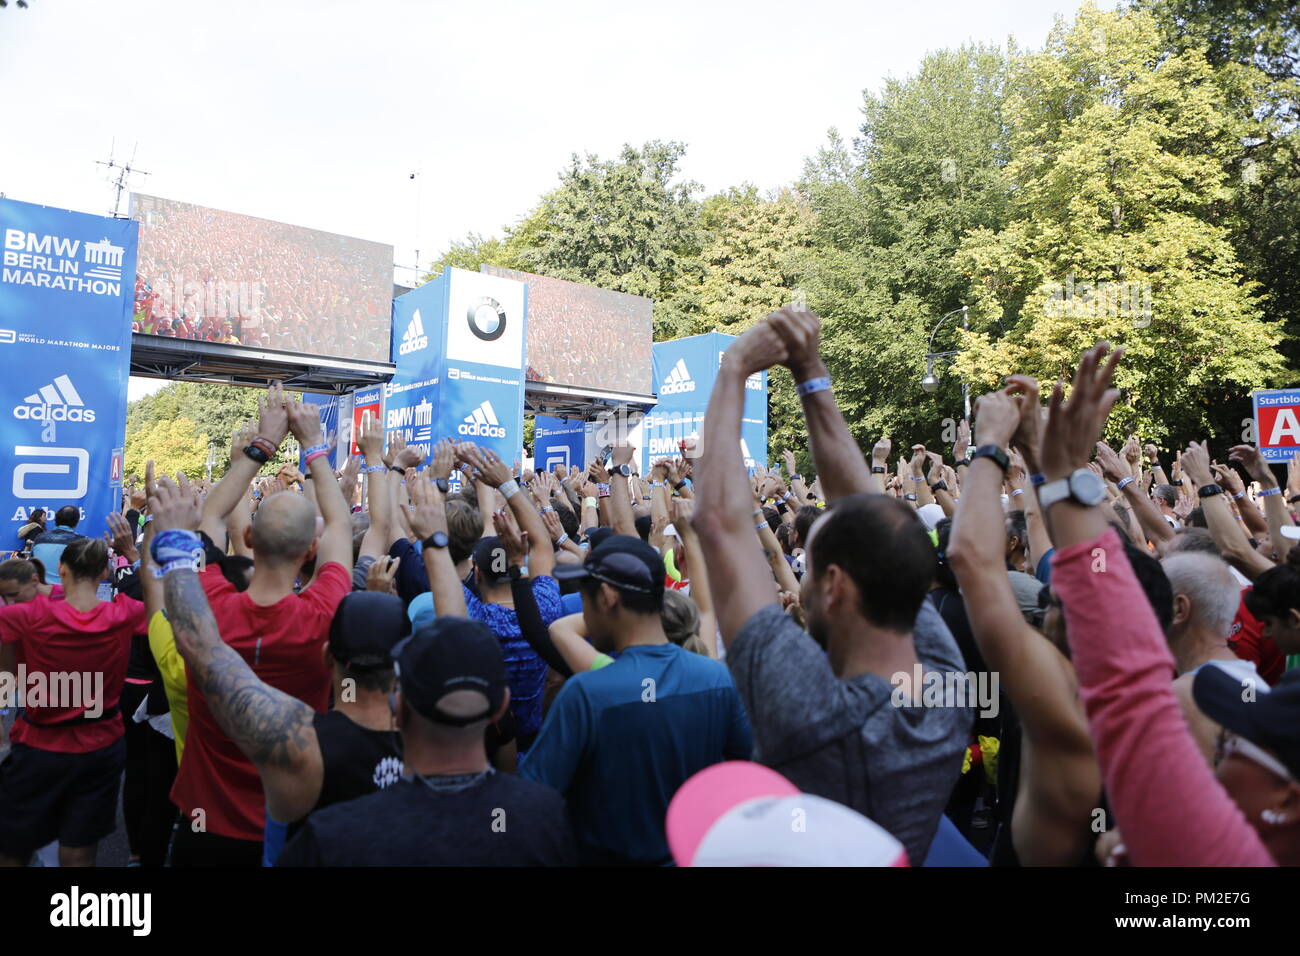 Bmw Berlin Marathon High Resolution Stock Photography and Images - Alamy